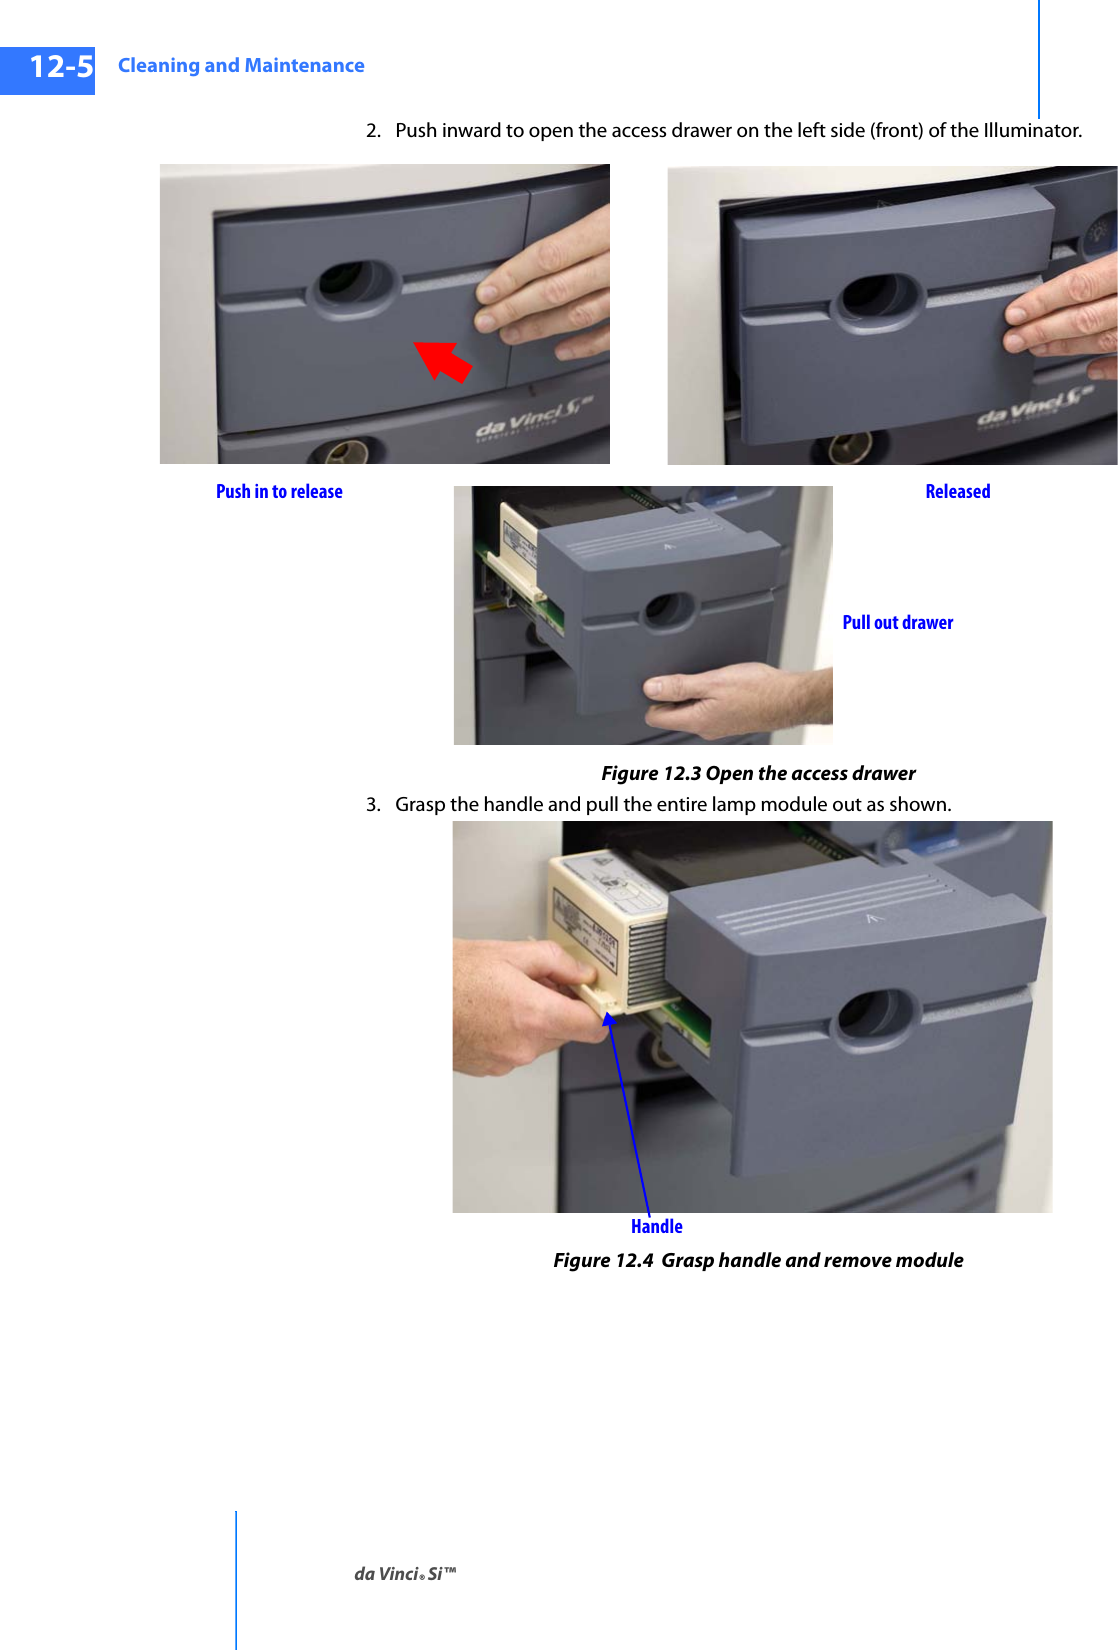 Cleaning and Maintenanceda Vinci® Si™12-5DRAFT/PRE-RELEASE/CONFIDENTIAL10/9/142. Push inward to open the access drawer on the left side (front) of the Illuminator.Figure 12.3 Open the access drawer3. Grasp the handle and pull the entire lamp module out as shown.Figure 12.4  Grasp handle and remove modulePush in to release ReleasedPull out drawerHandle